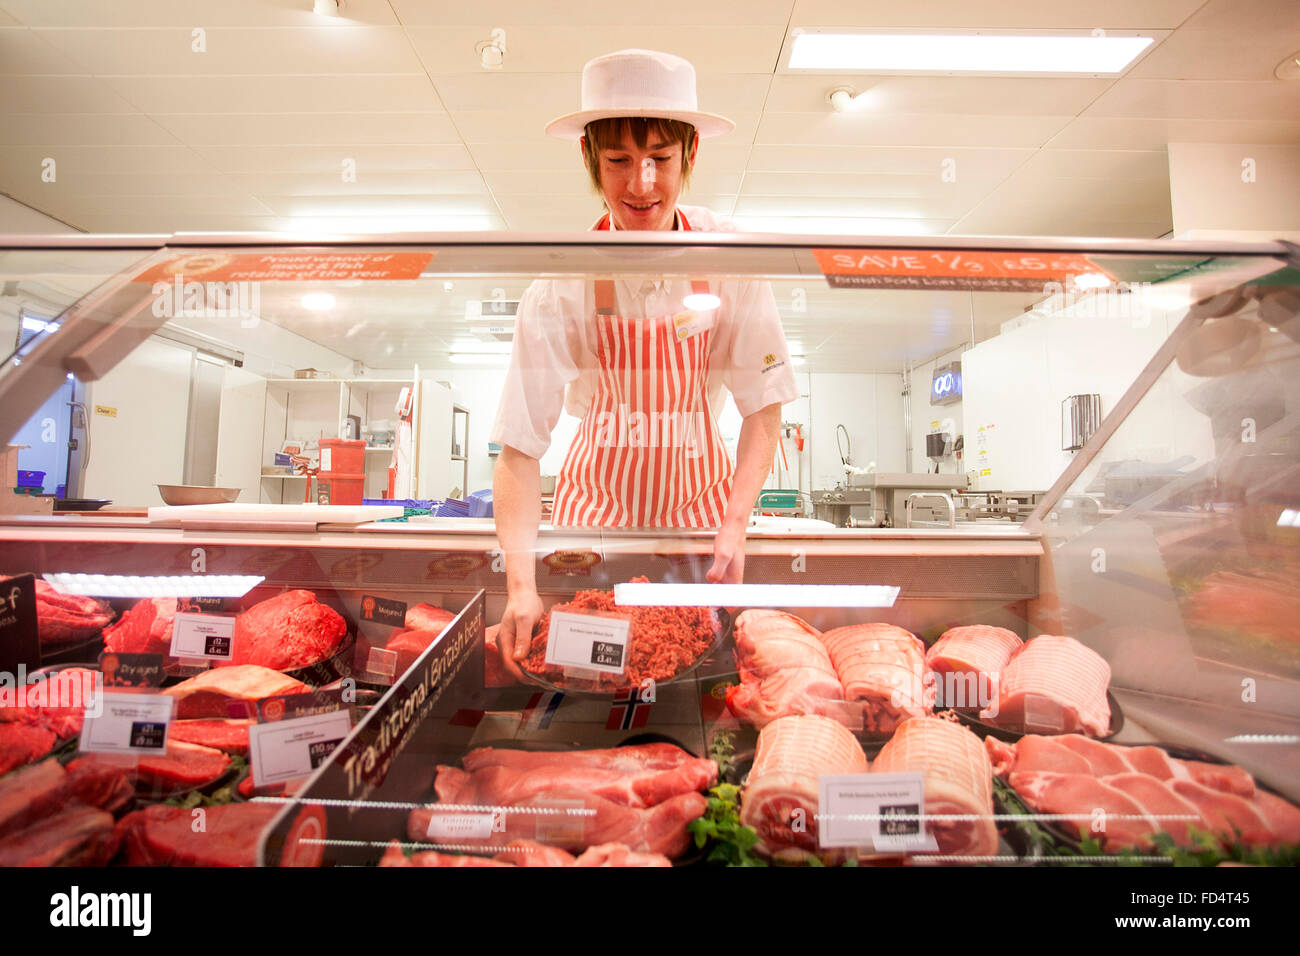 Morrisons supermarket. A man works on the butcher counter Stock Photo